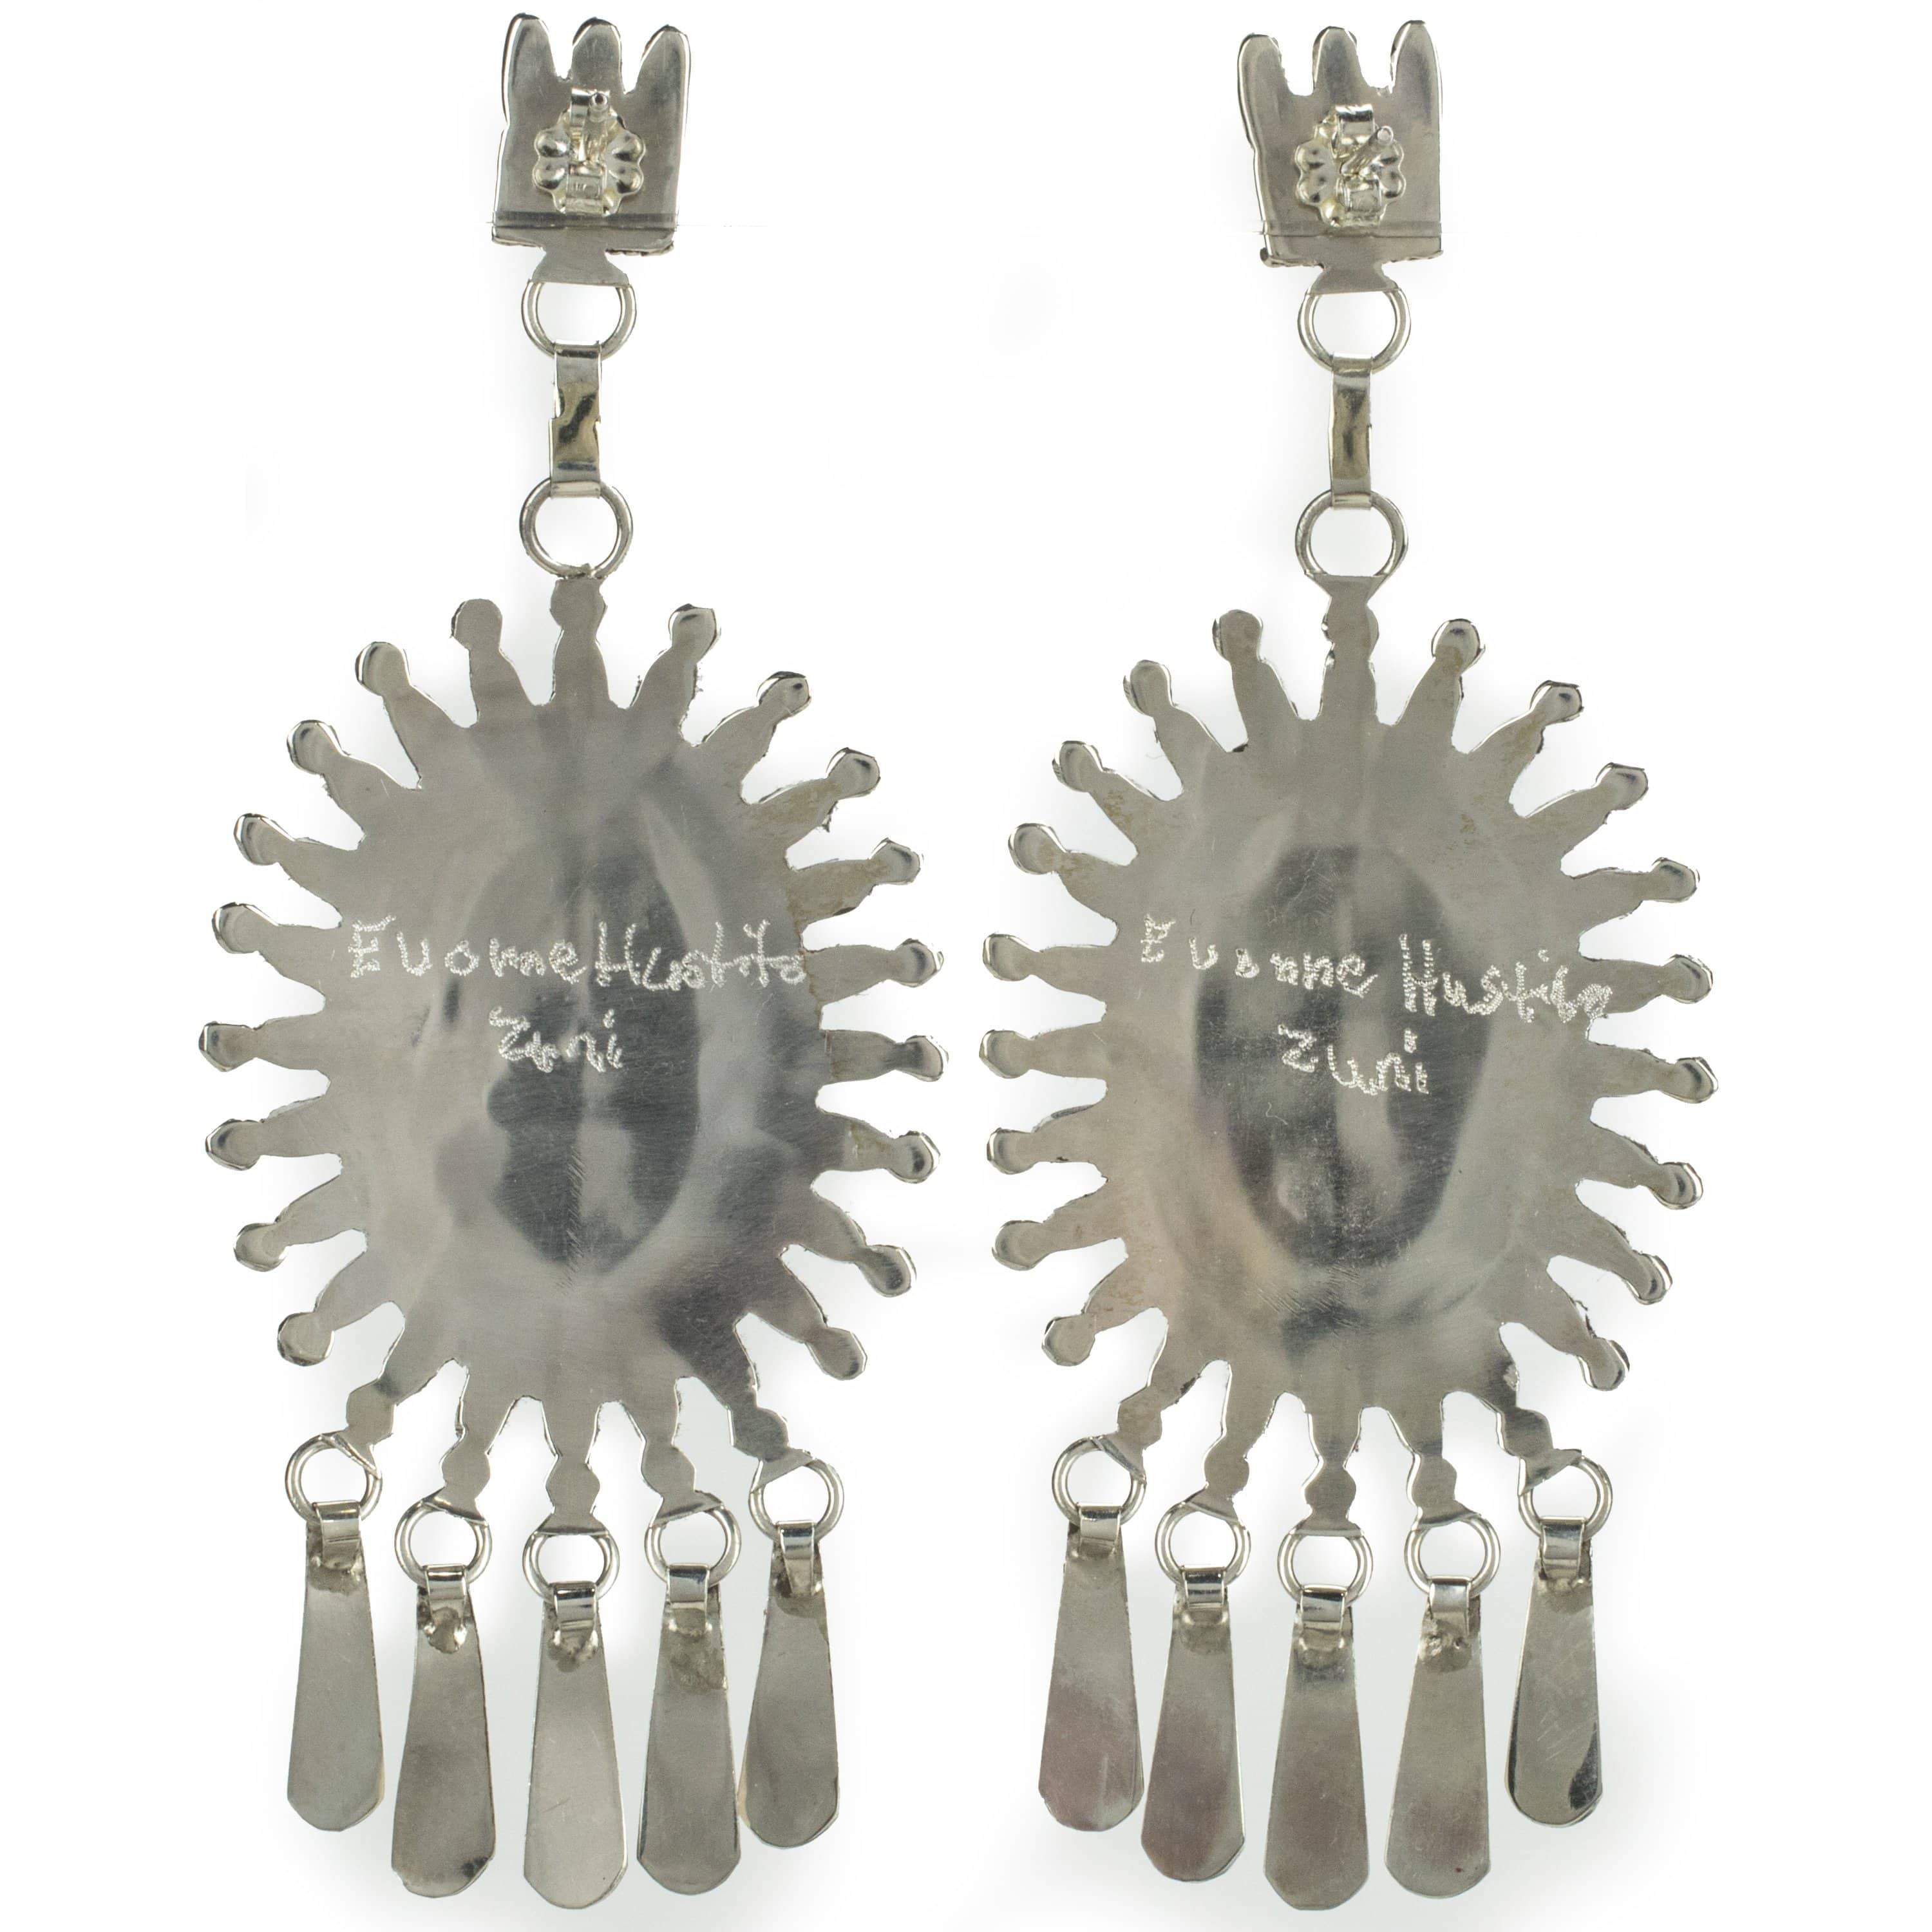 Kalifano Native American Jewelry Euome Hustito Kingman Turquoise Zuni Needle Point USA Native American Made 925 Sterling Silver Earrings with Stud Backing NAE1700.001